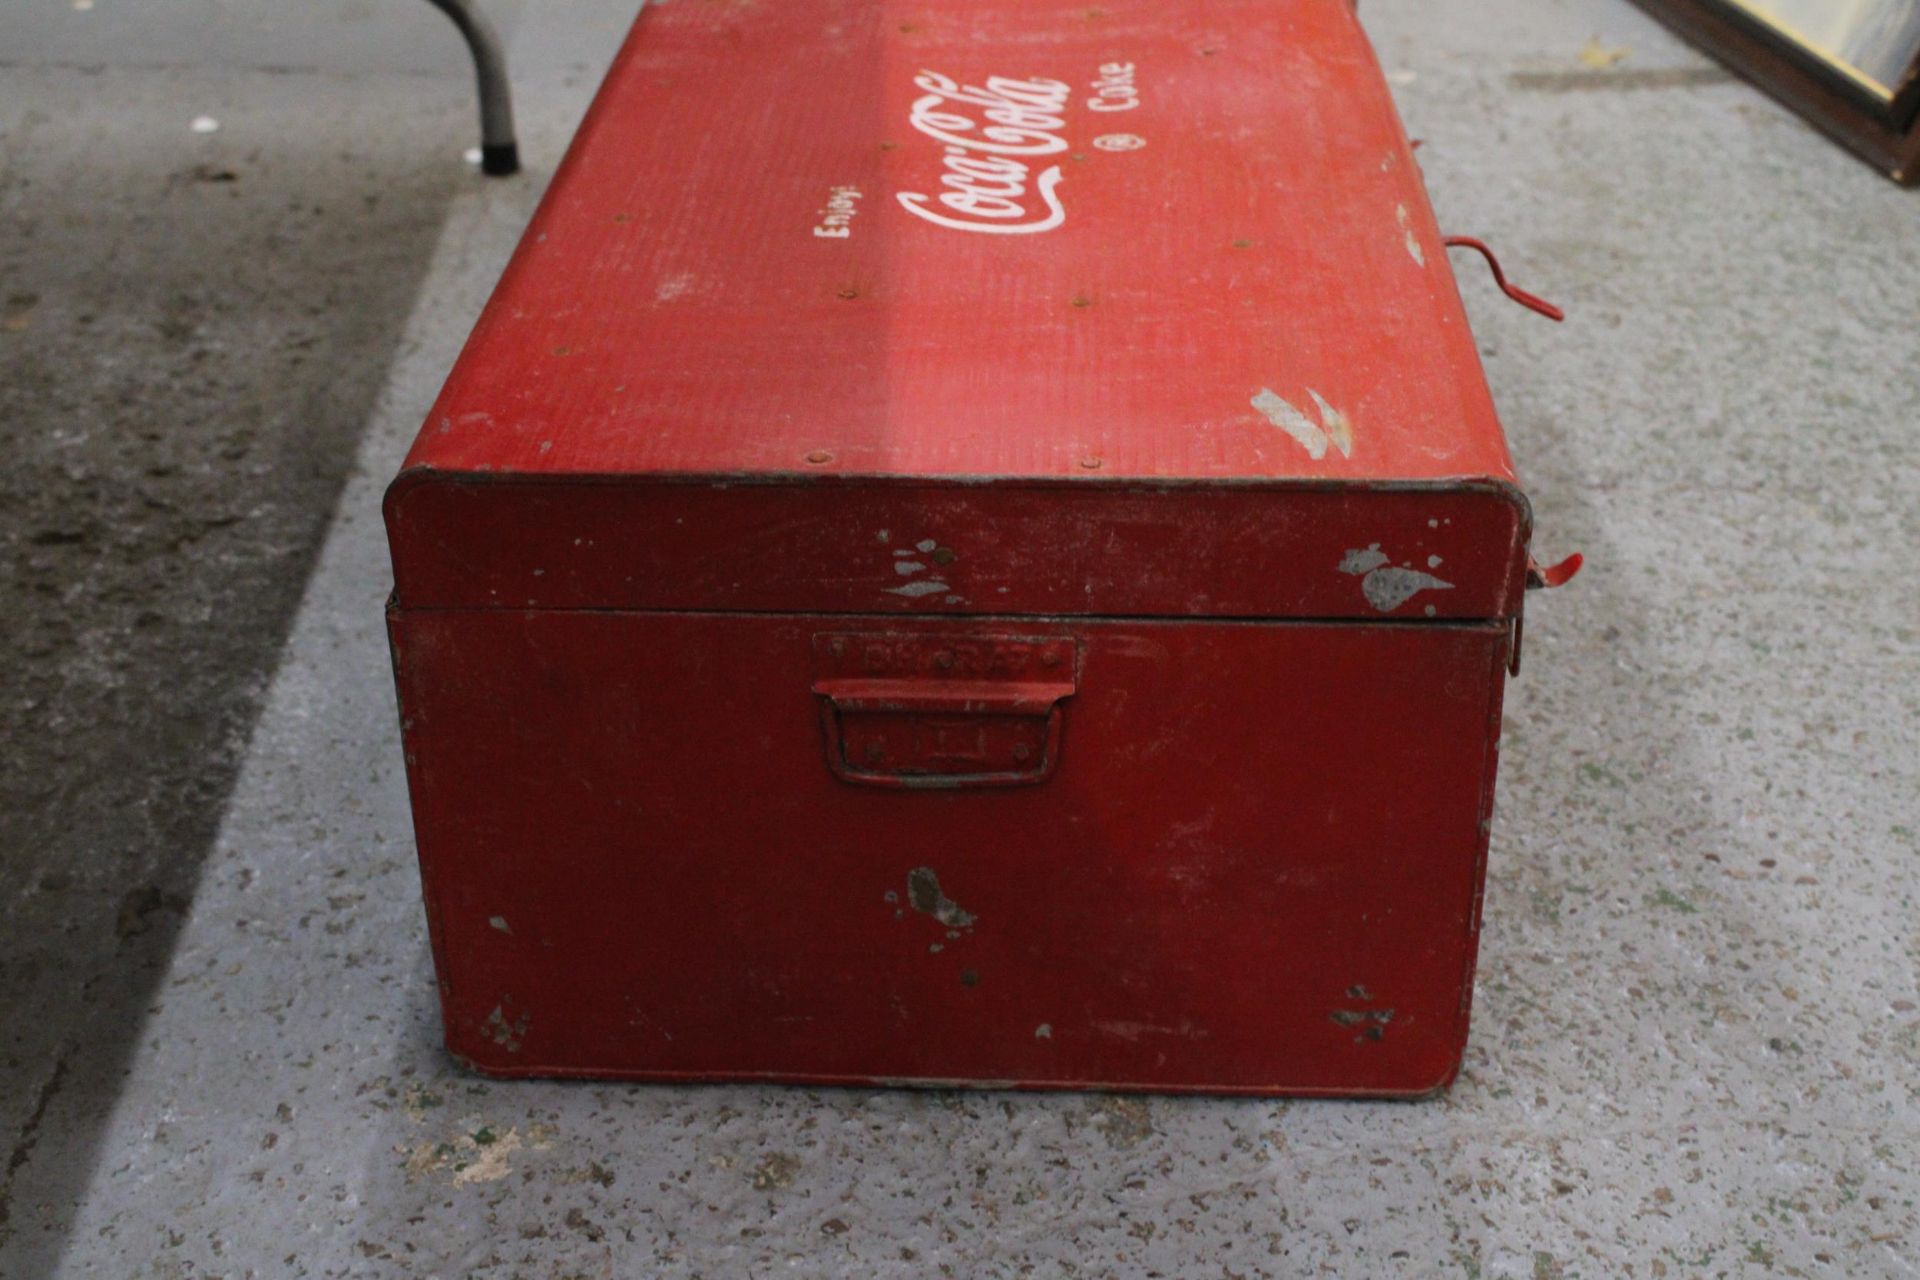 A LARGE RED 'COCA-COLA' COOL BOX, HEIGHT 28CM, WIDTH 68CM, DEPTH 39CM - Image 4 of 5